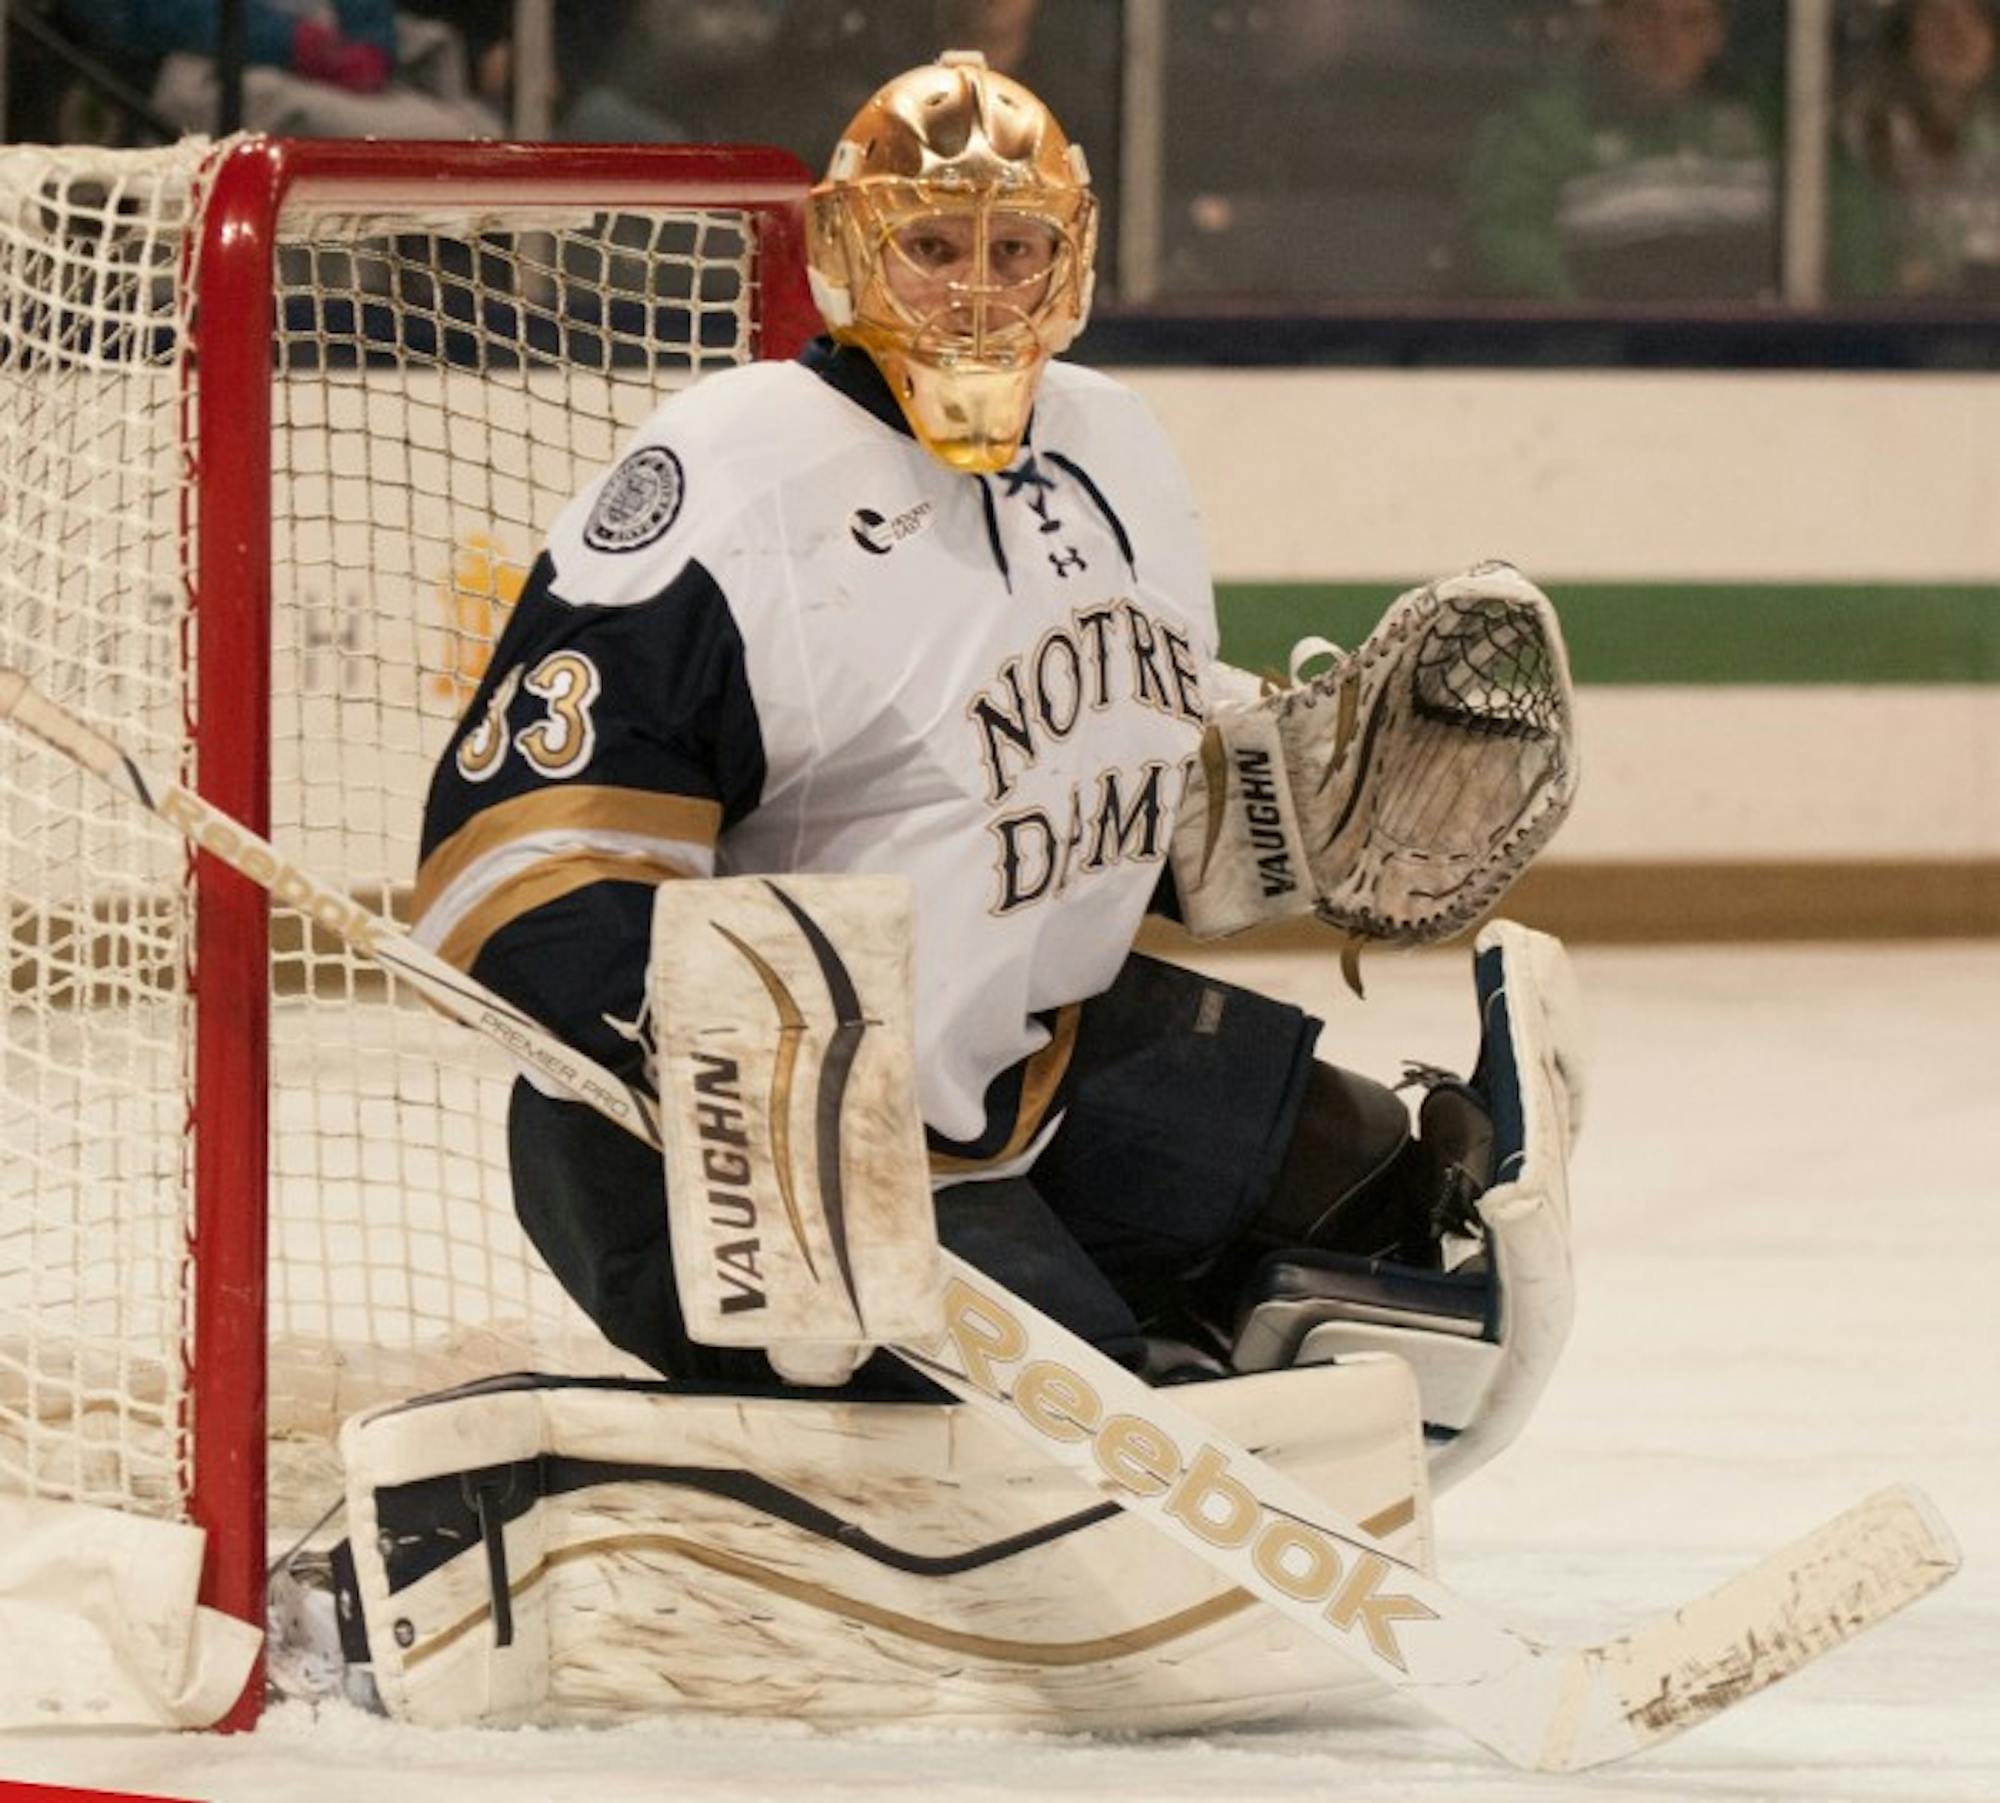 Irish sophomore goaltender Chad Katunar stares down the ice  during Notre Dame’s 3-1 loss to UMass-Lowell on Thursday night.